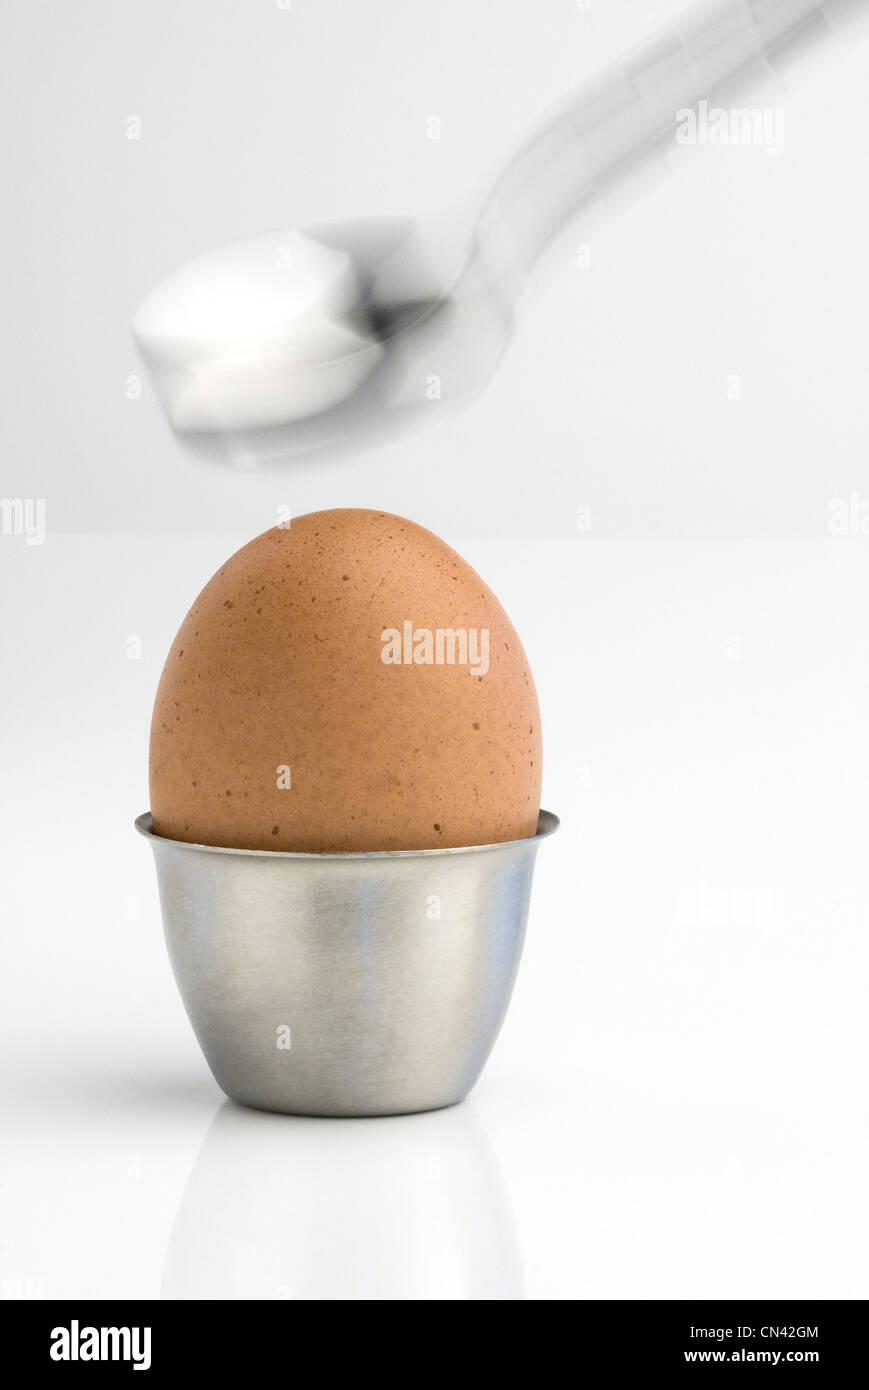 Striking boiled egg in a stainless steel egg cup with a spoon. Stock Photo